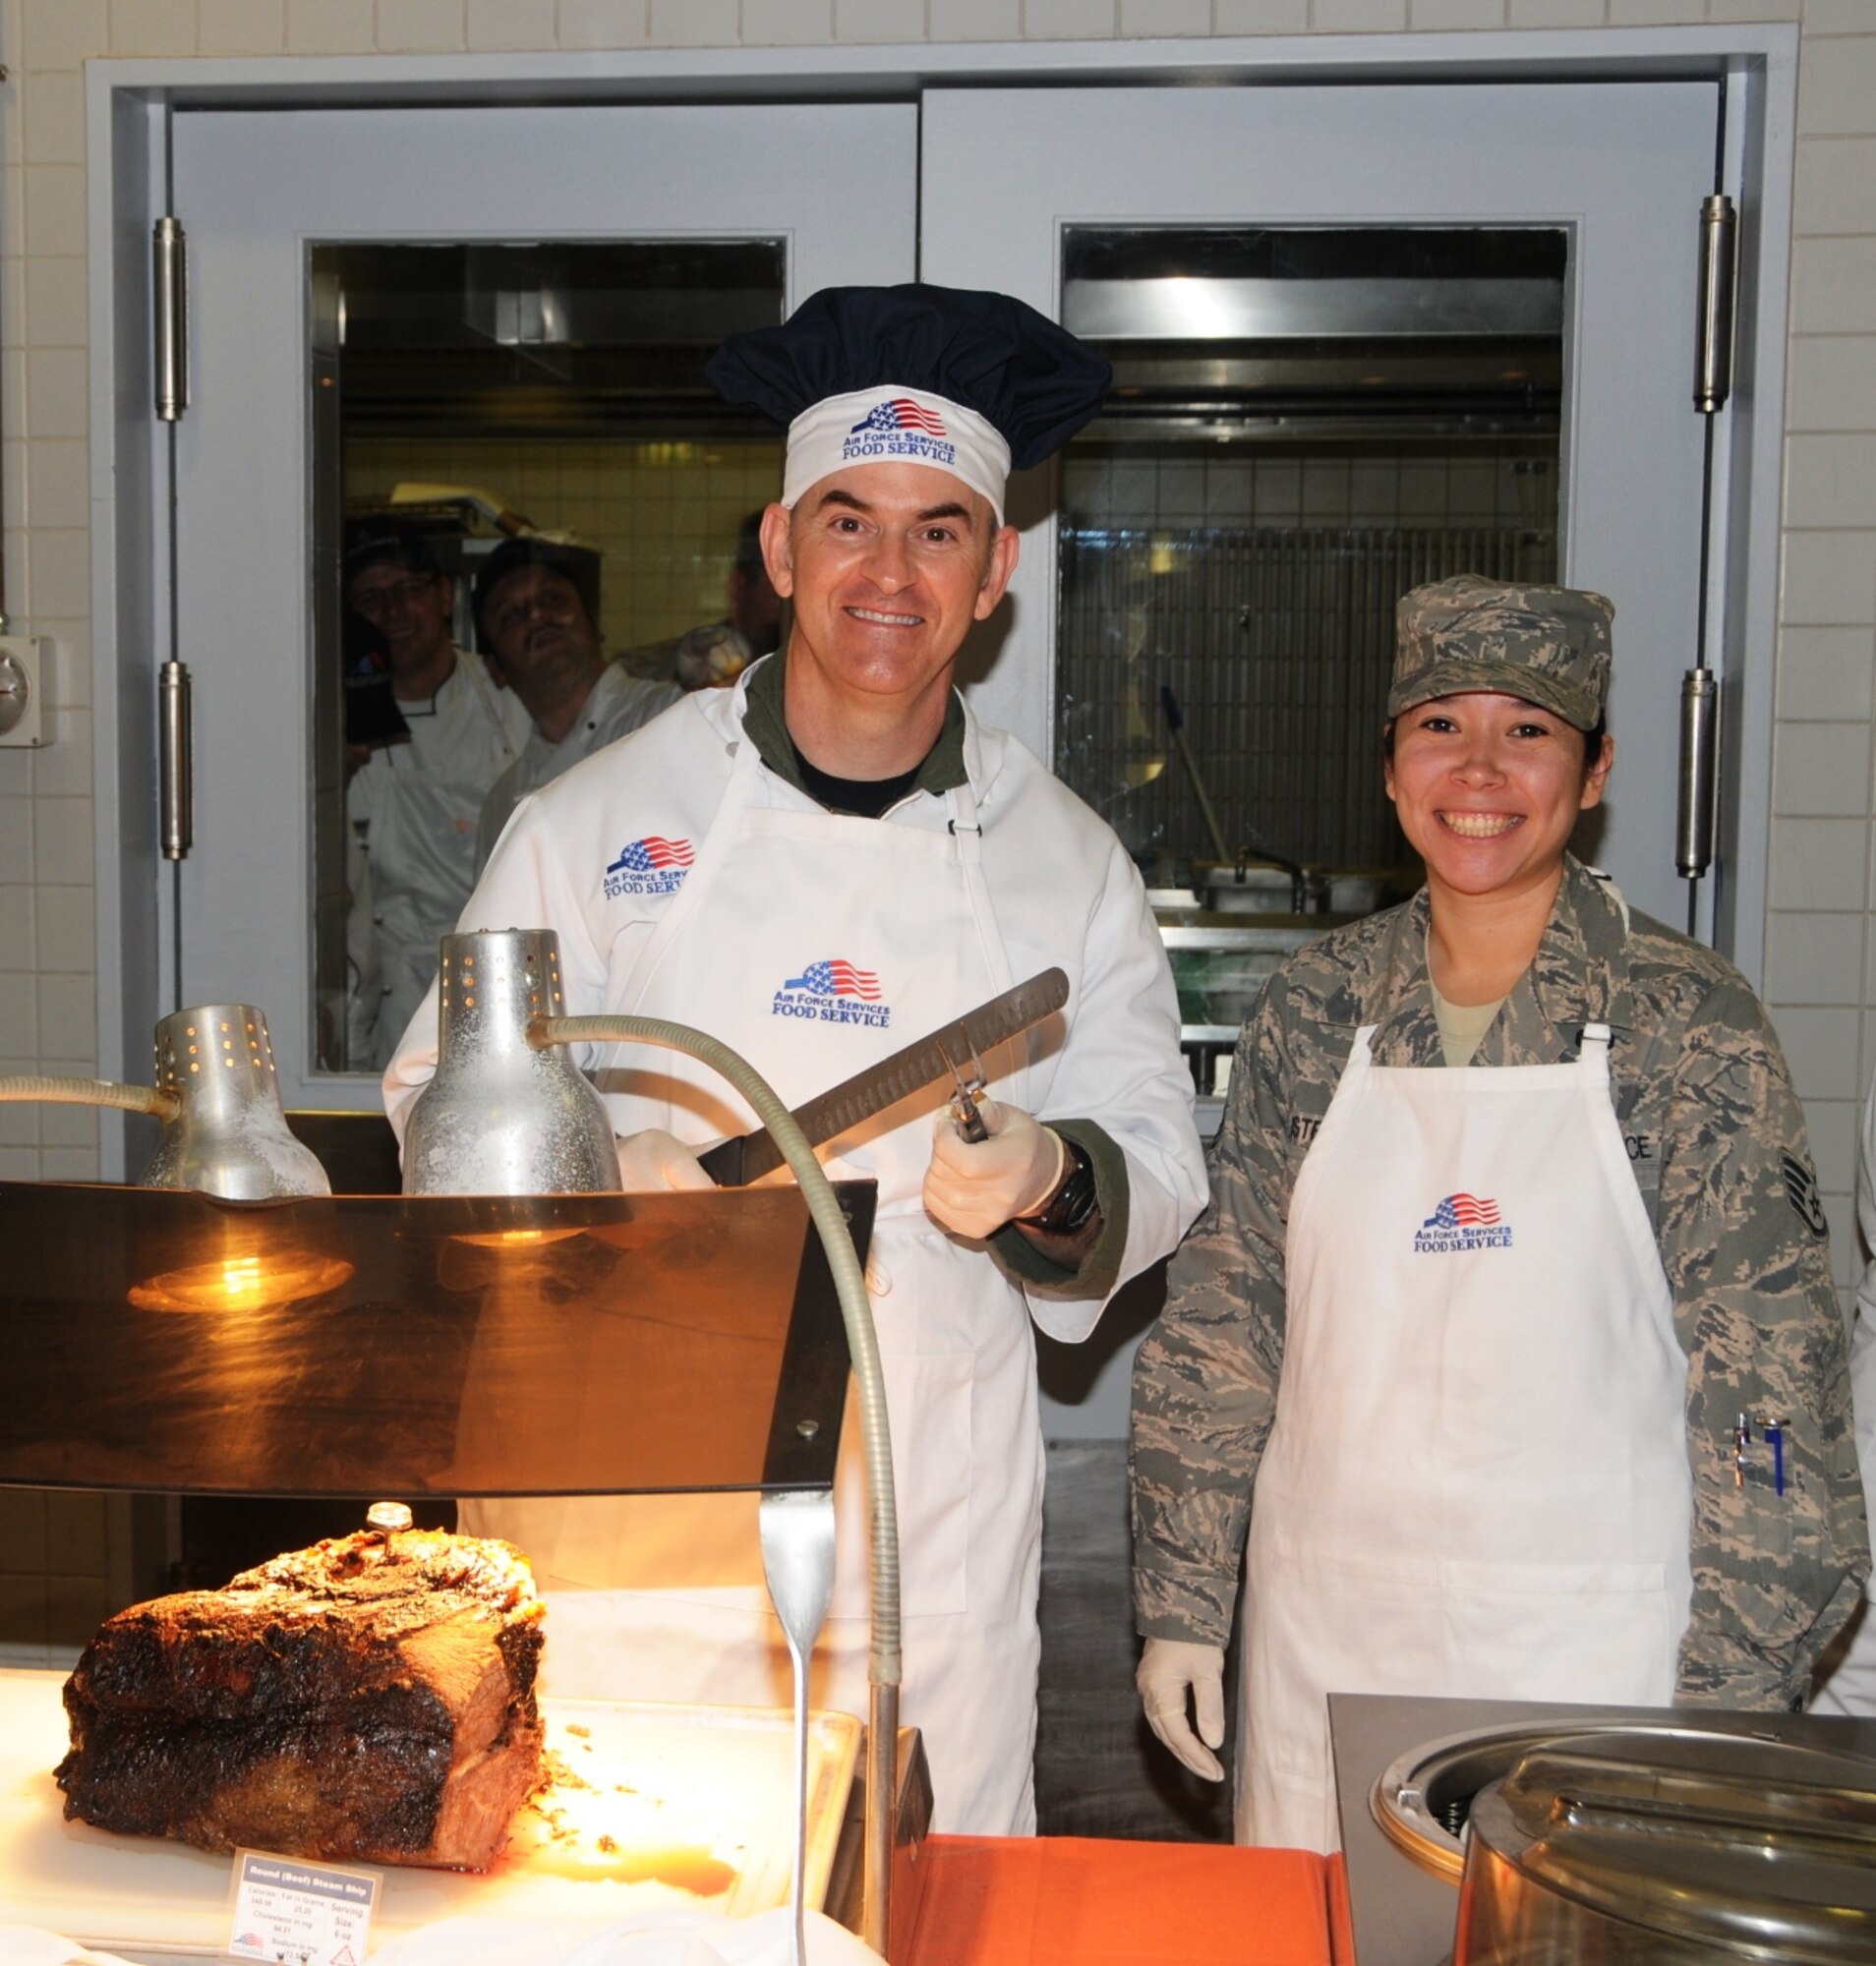 RAMSTEIN AIR BASE, Germany -- 17th Air Force Vice Commander Brig. Gen. Michael Callan (left) joins Shift Leader Staff Sgt. Samantha Bustraan, 86th Services Squadron, at the Ramstein Dining Facility Thanksgiving Day (Nov. 26) to serve and celebrate the holiday with troops and their families. (USAF photo by Master Sgt. Jim Fisher)